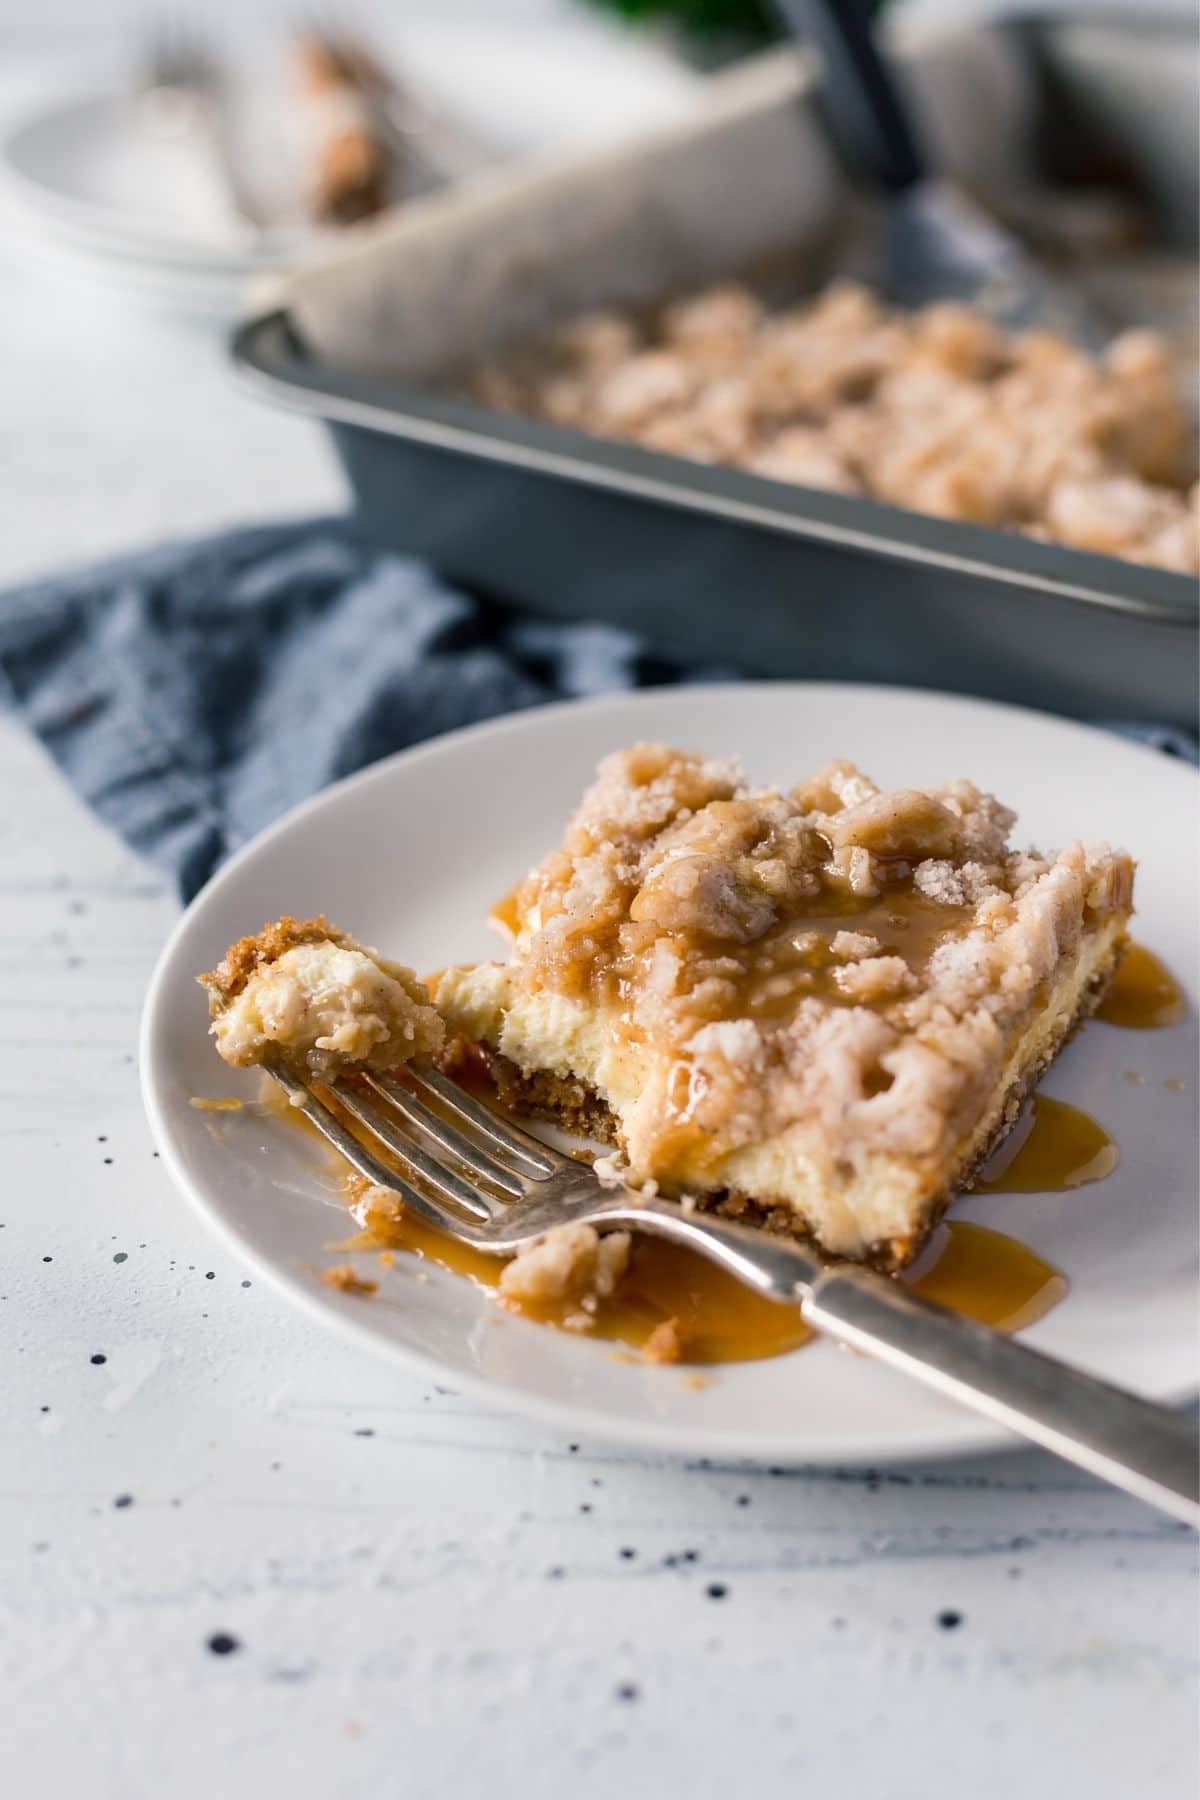 Apple bars with caramel on white plate by pan